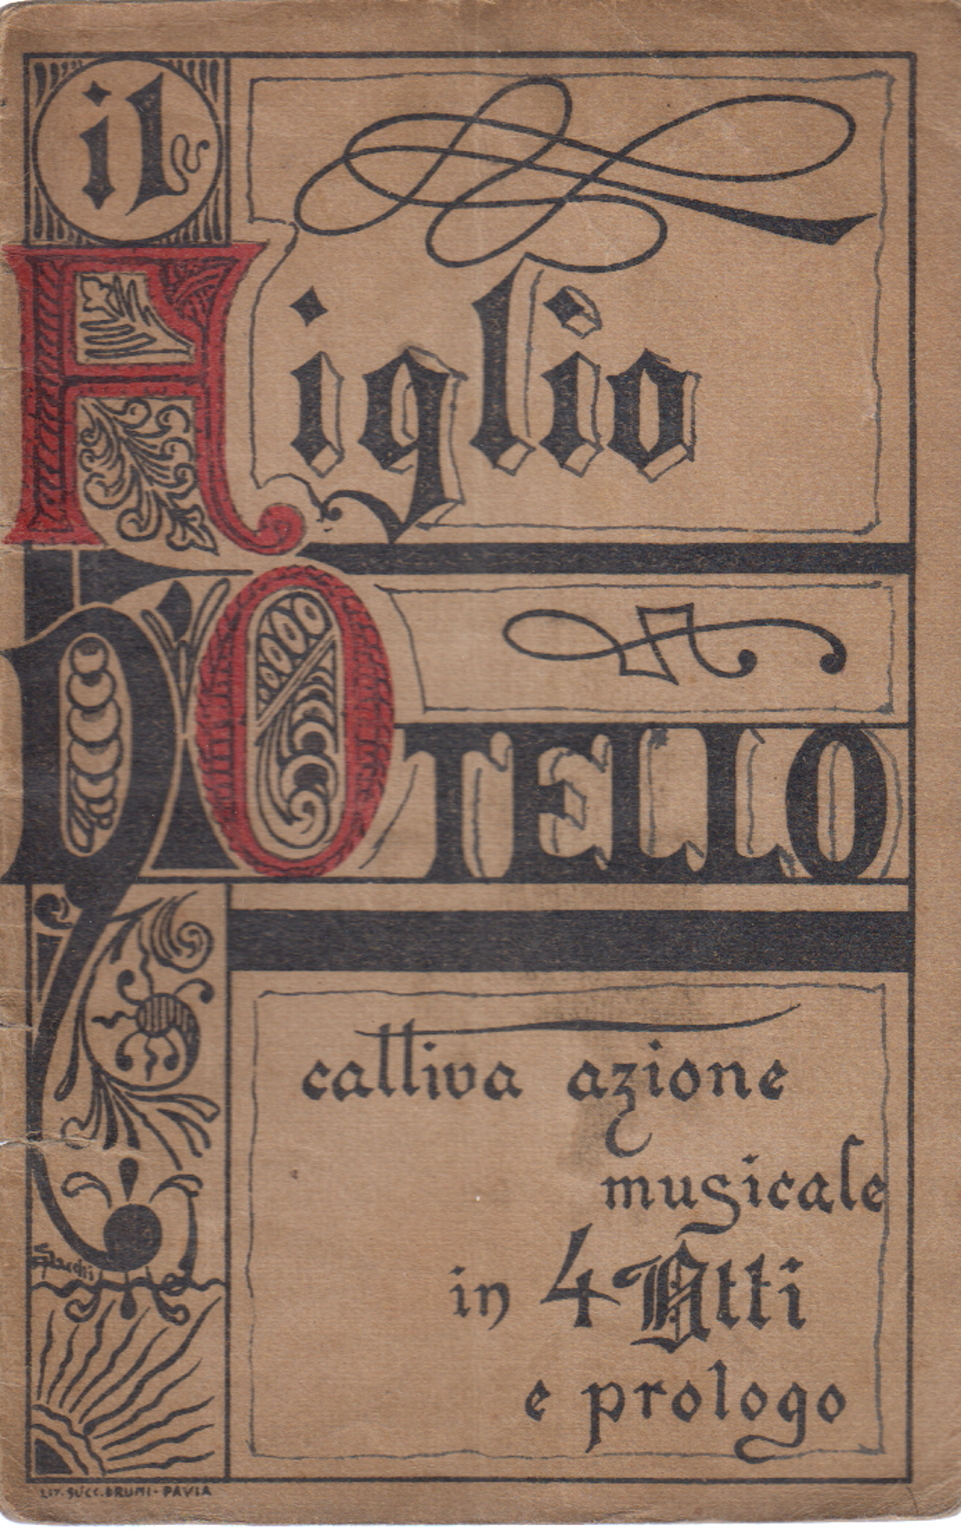 The son of Othello, a chronicle of 1300 cat, AA.VV.